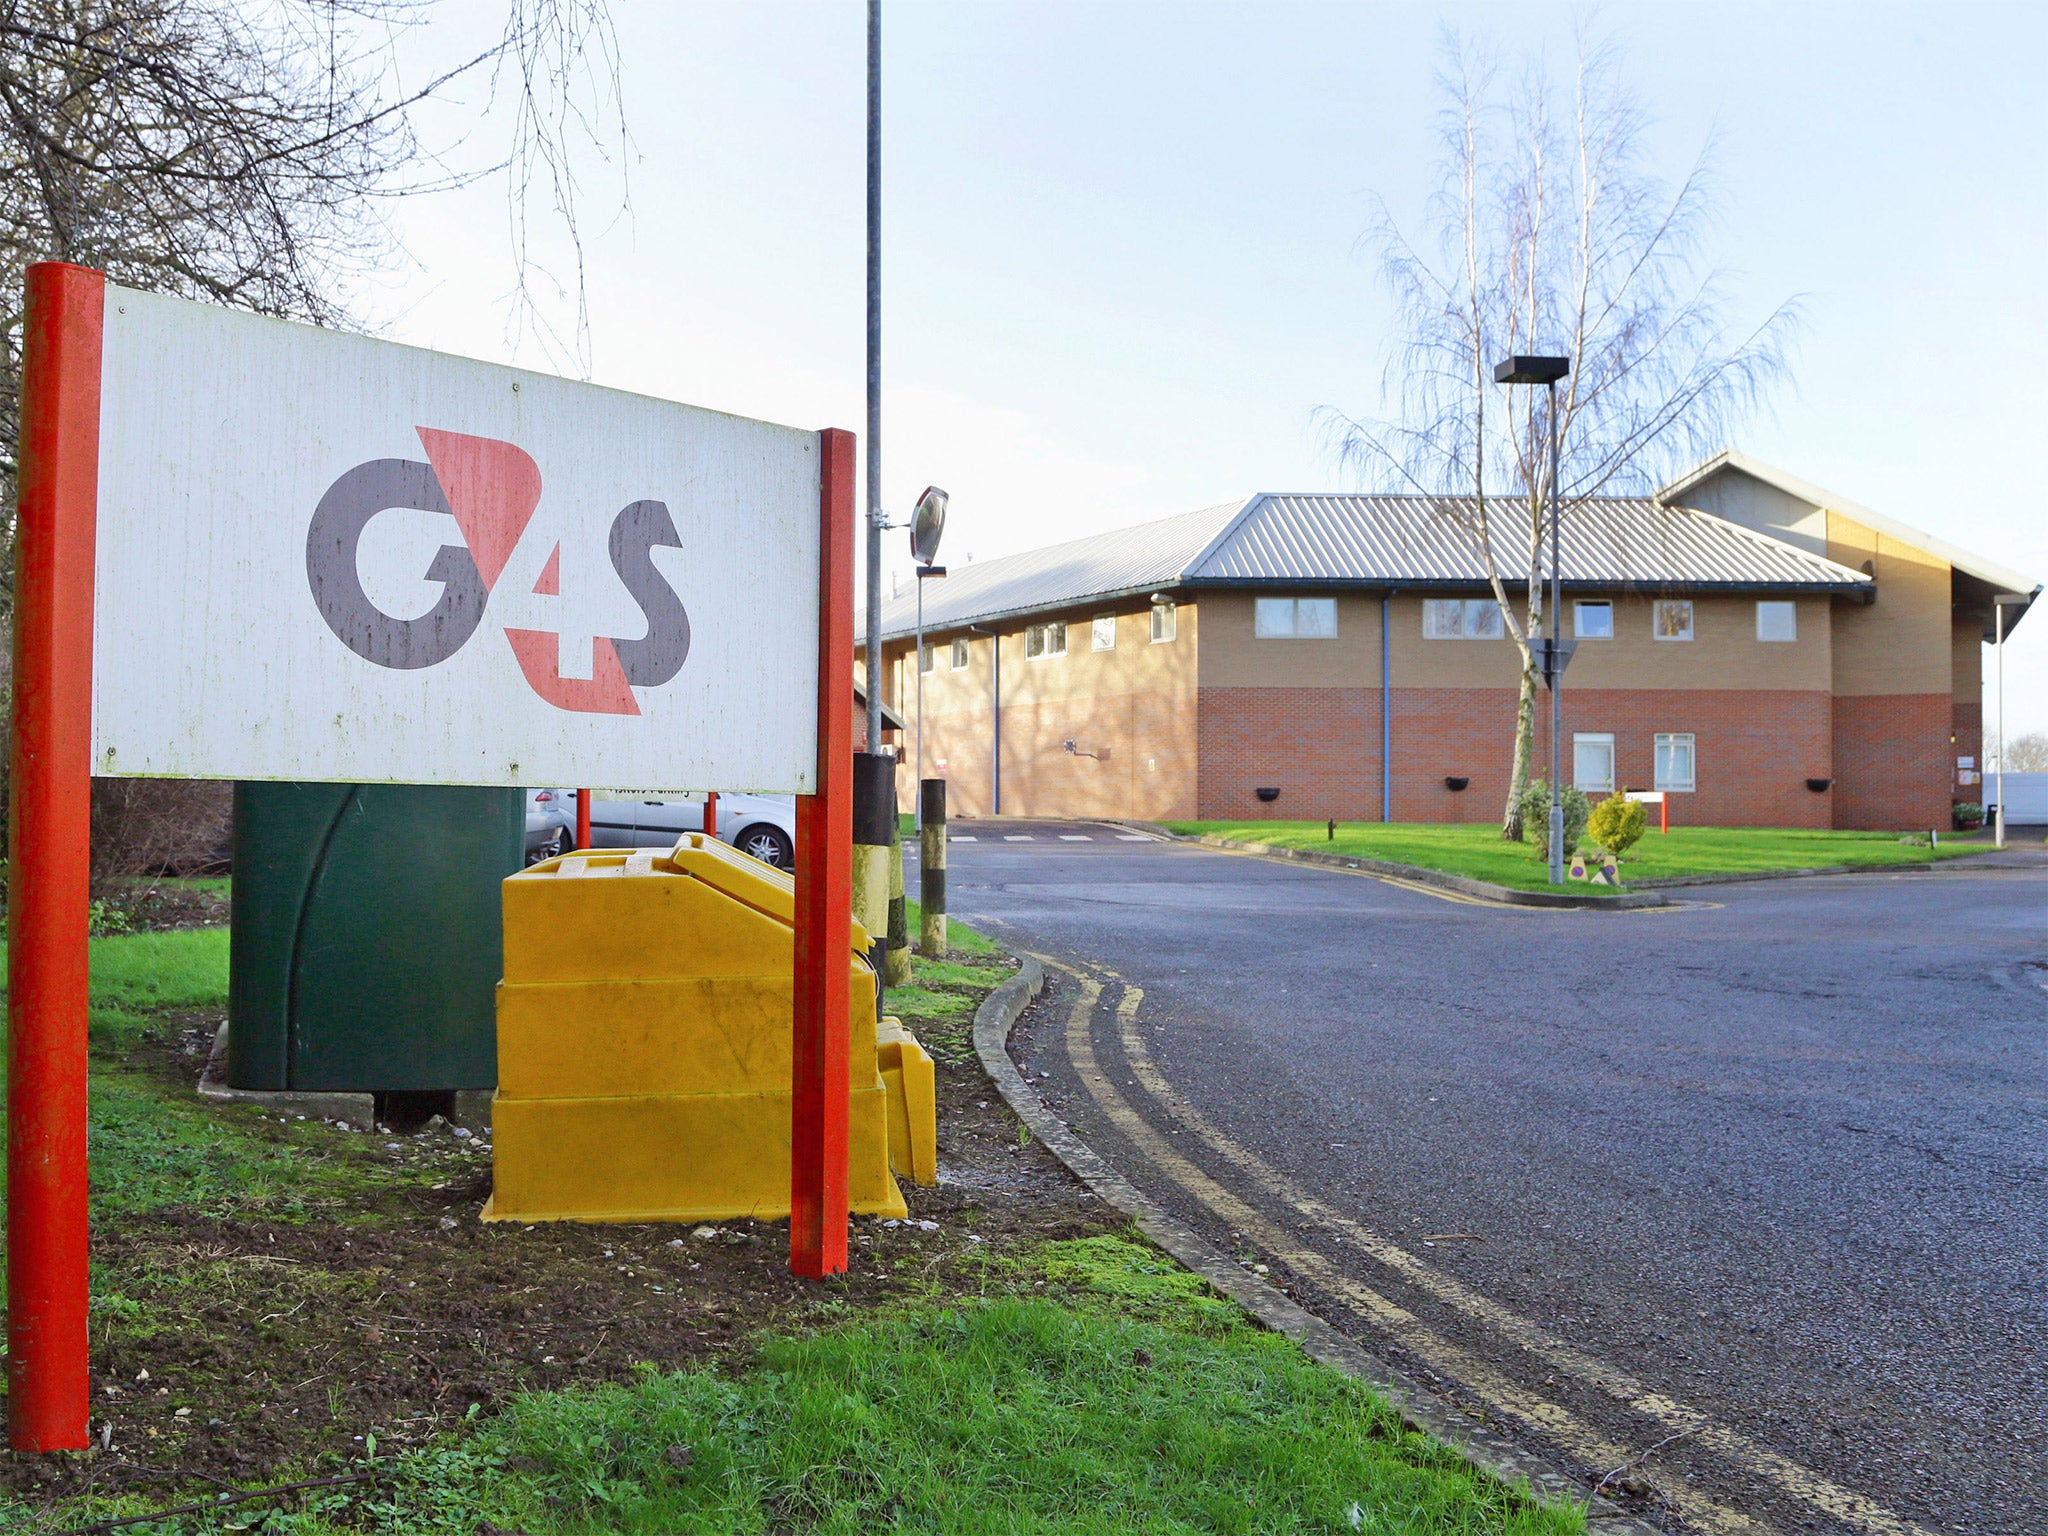 Medway Secure Training Centre was taken back under government control from G4S in 2016 following reports of abuse